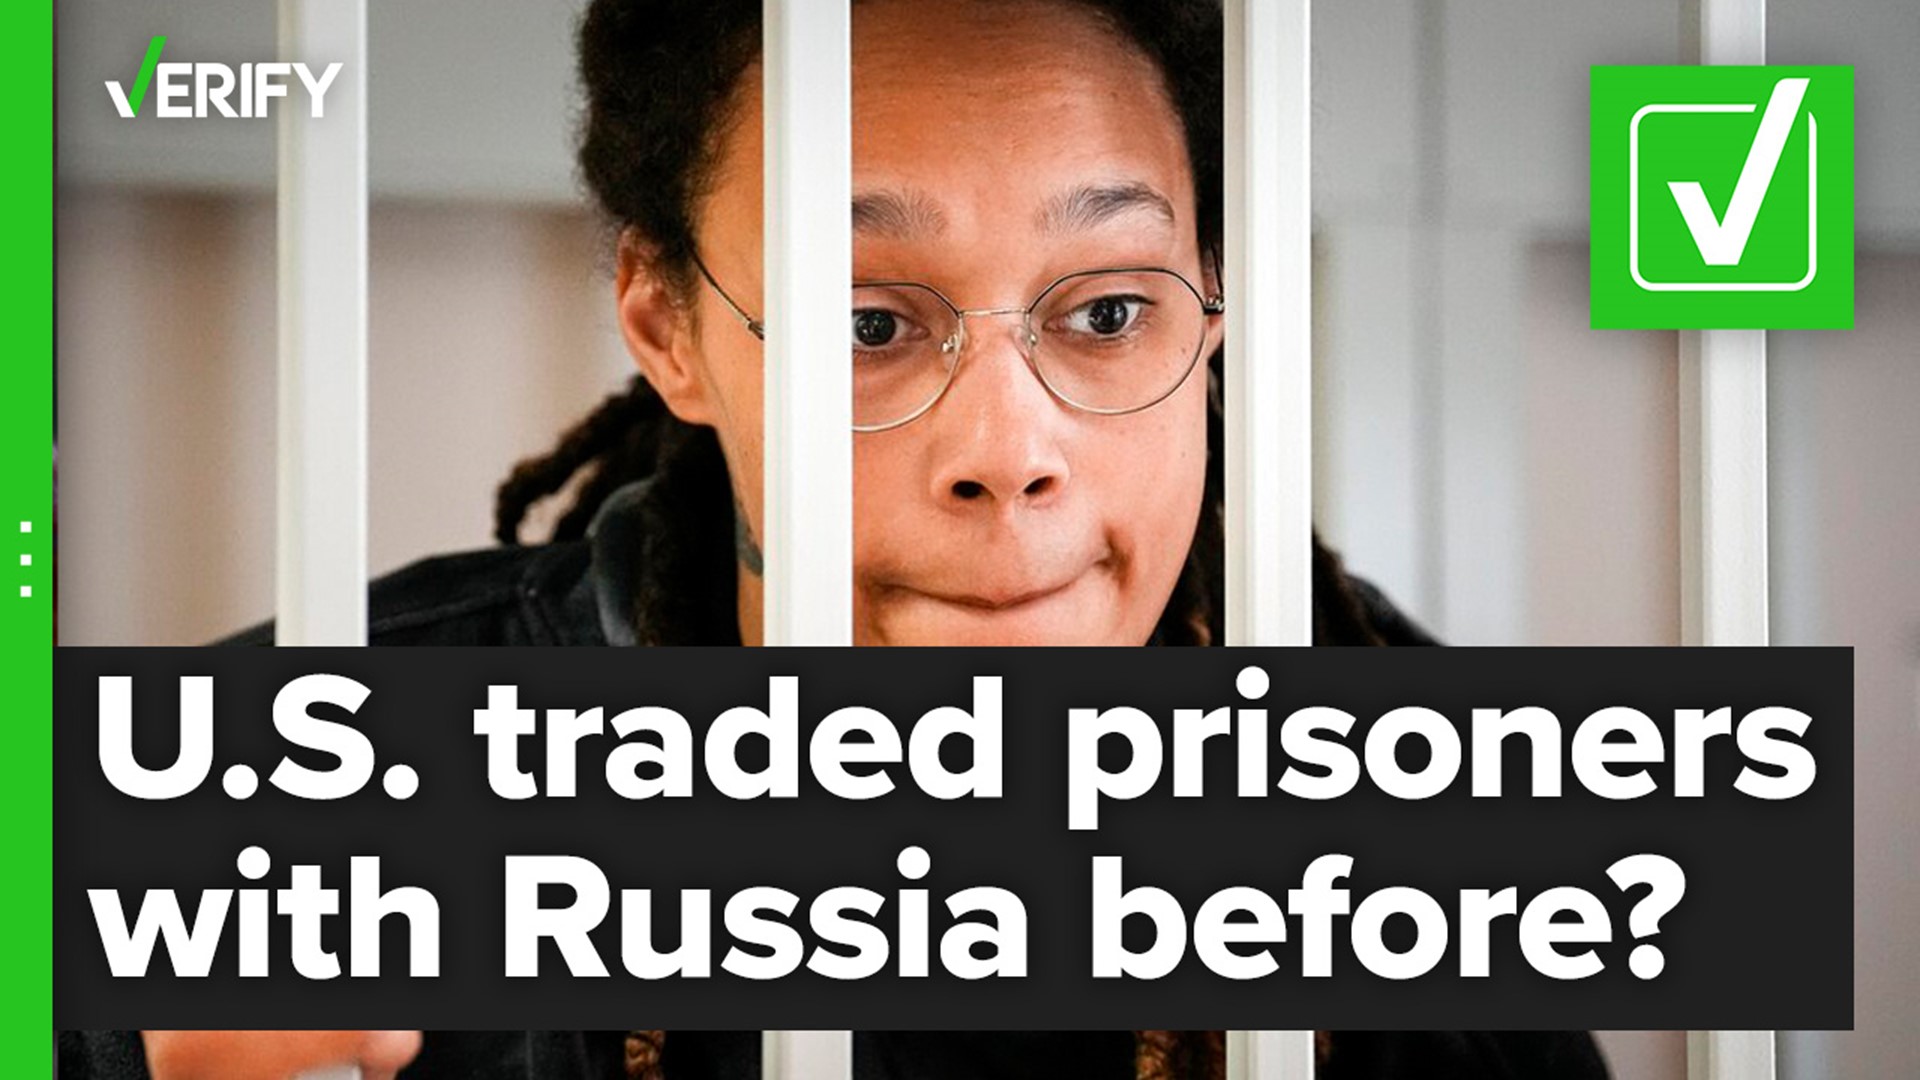 On Dec. 7, Brittney Griner was released as the latest example of a prisoner swap between the U.S. and Russia.